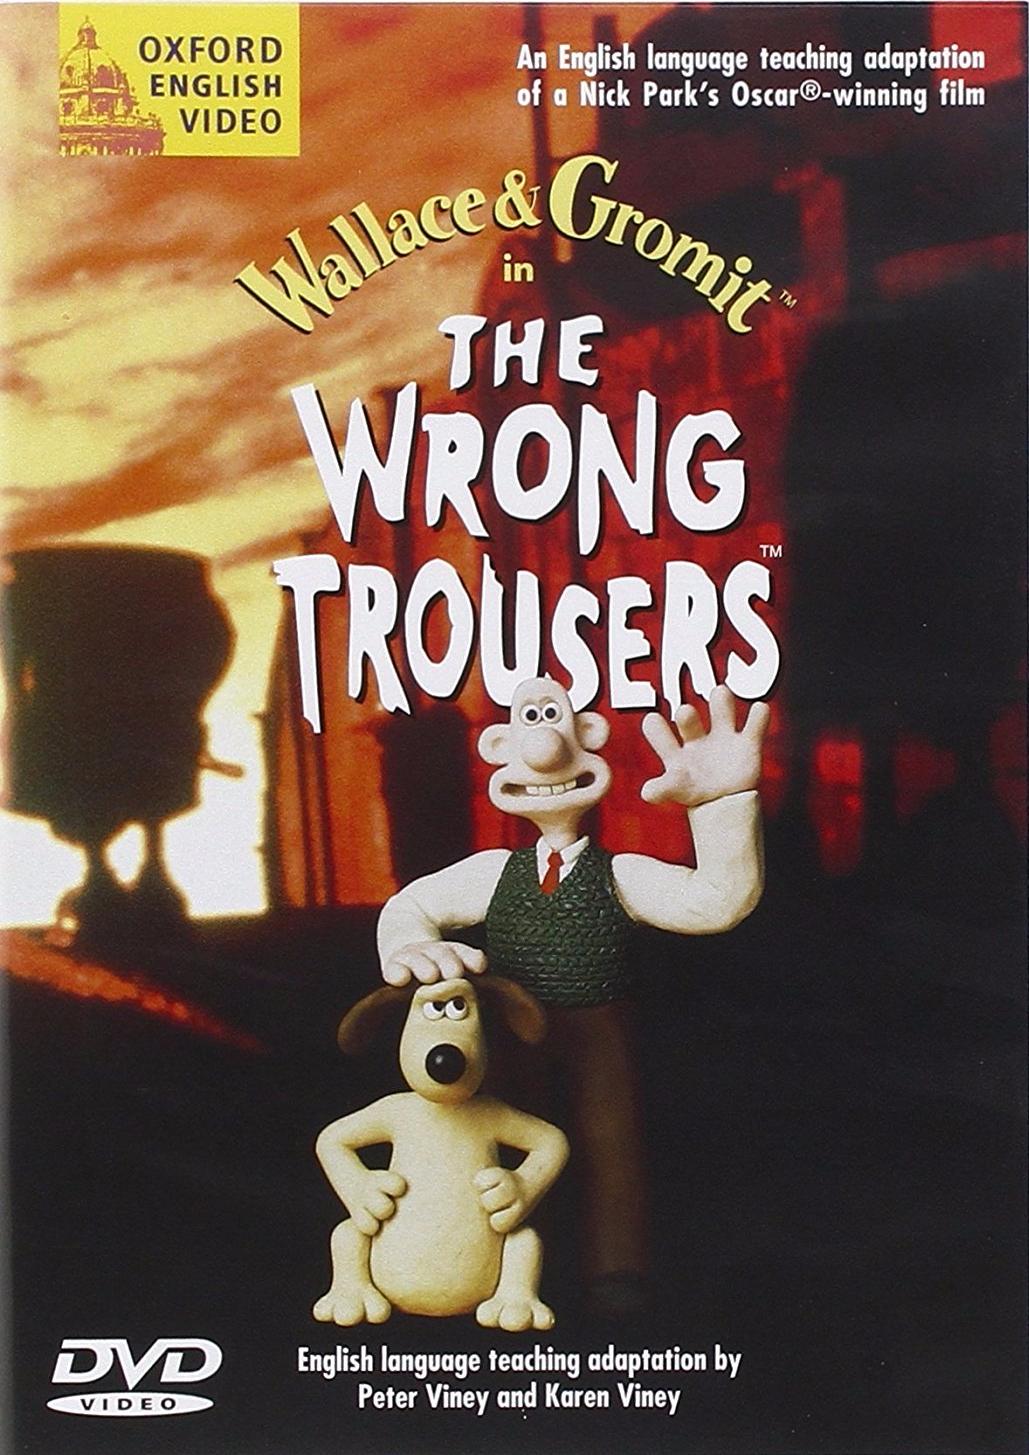 WALLACE & GROMIT IN THE WRONG TROUSES DVD